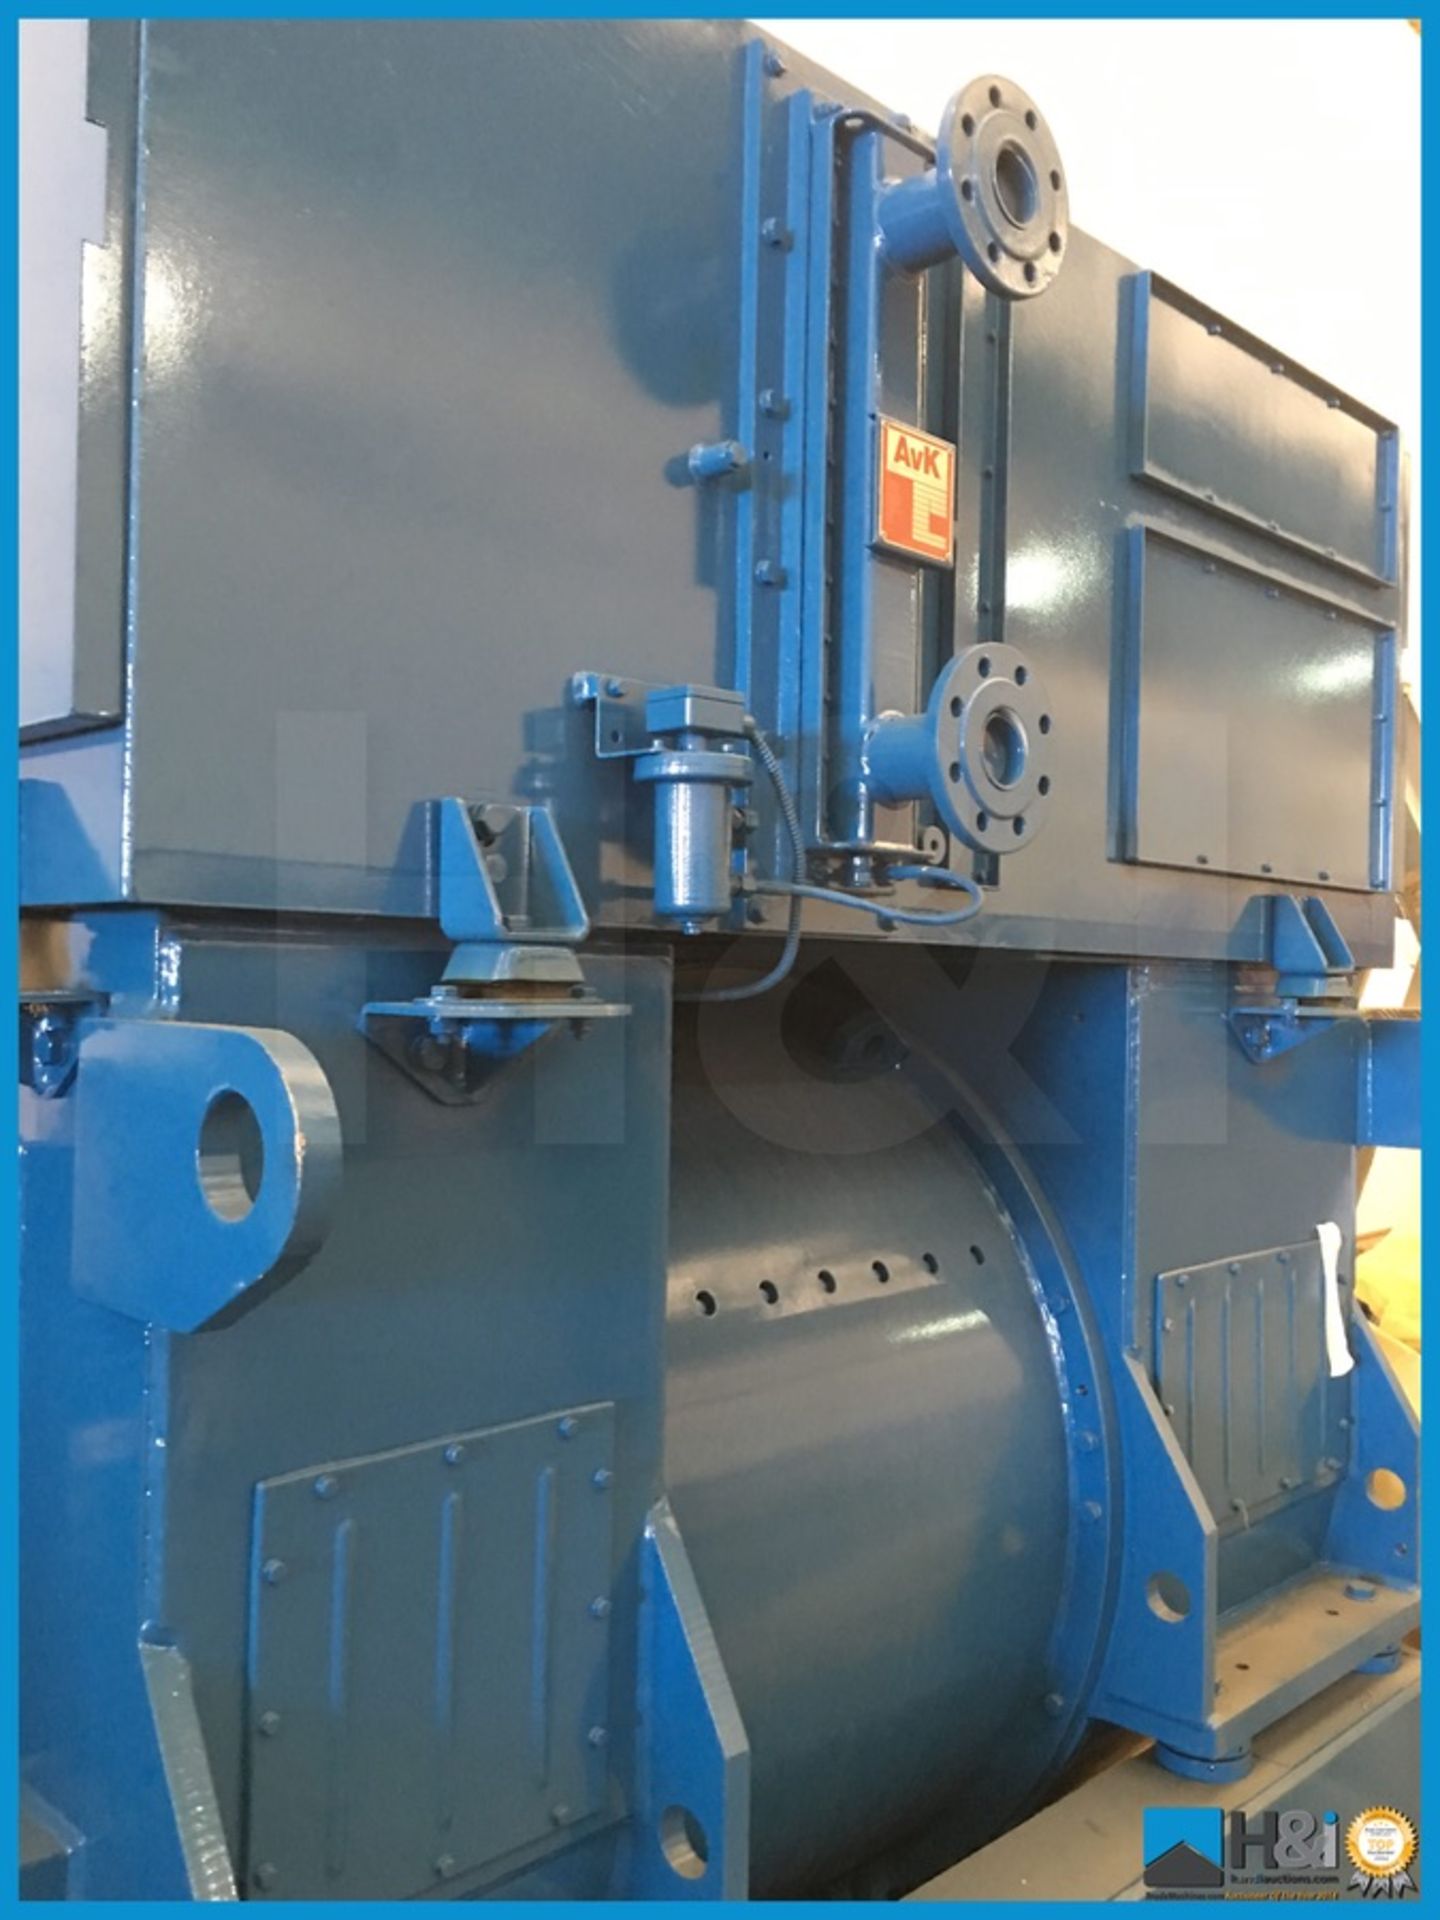 Unused Wartsila 8L20 high capacity diesel generator manufactured in 2013 for a large marine - Image 6 of 19